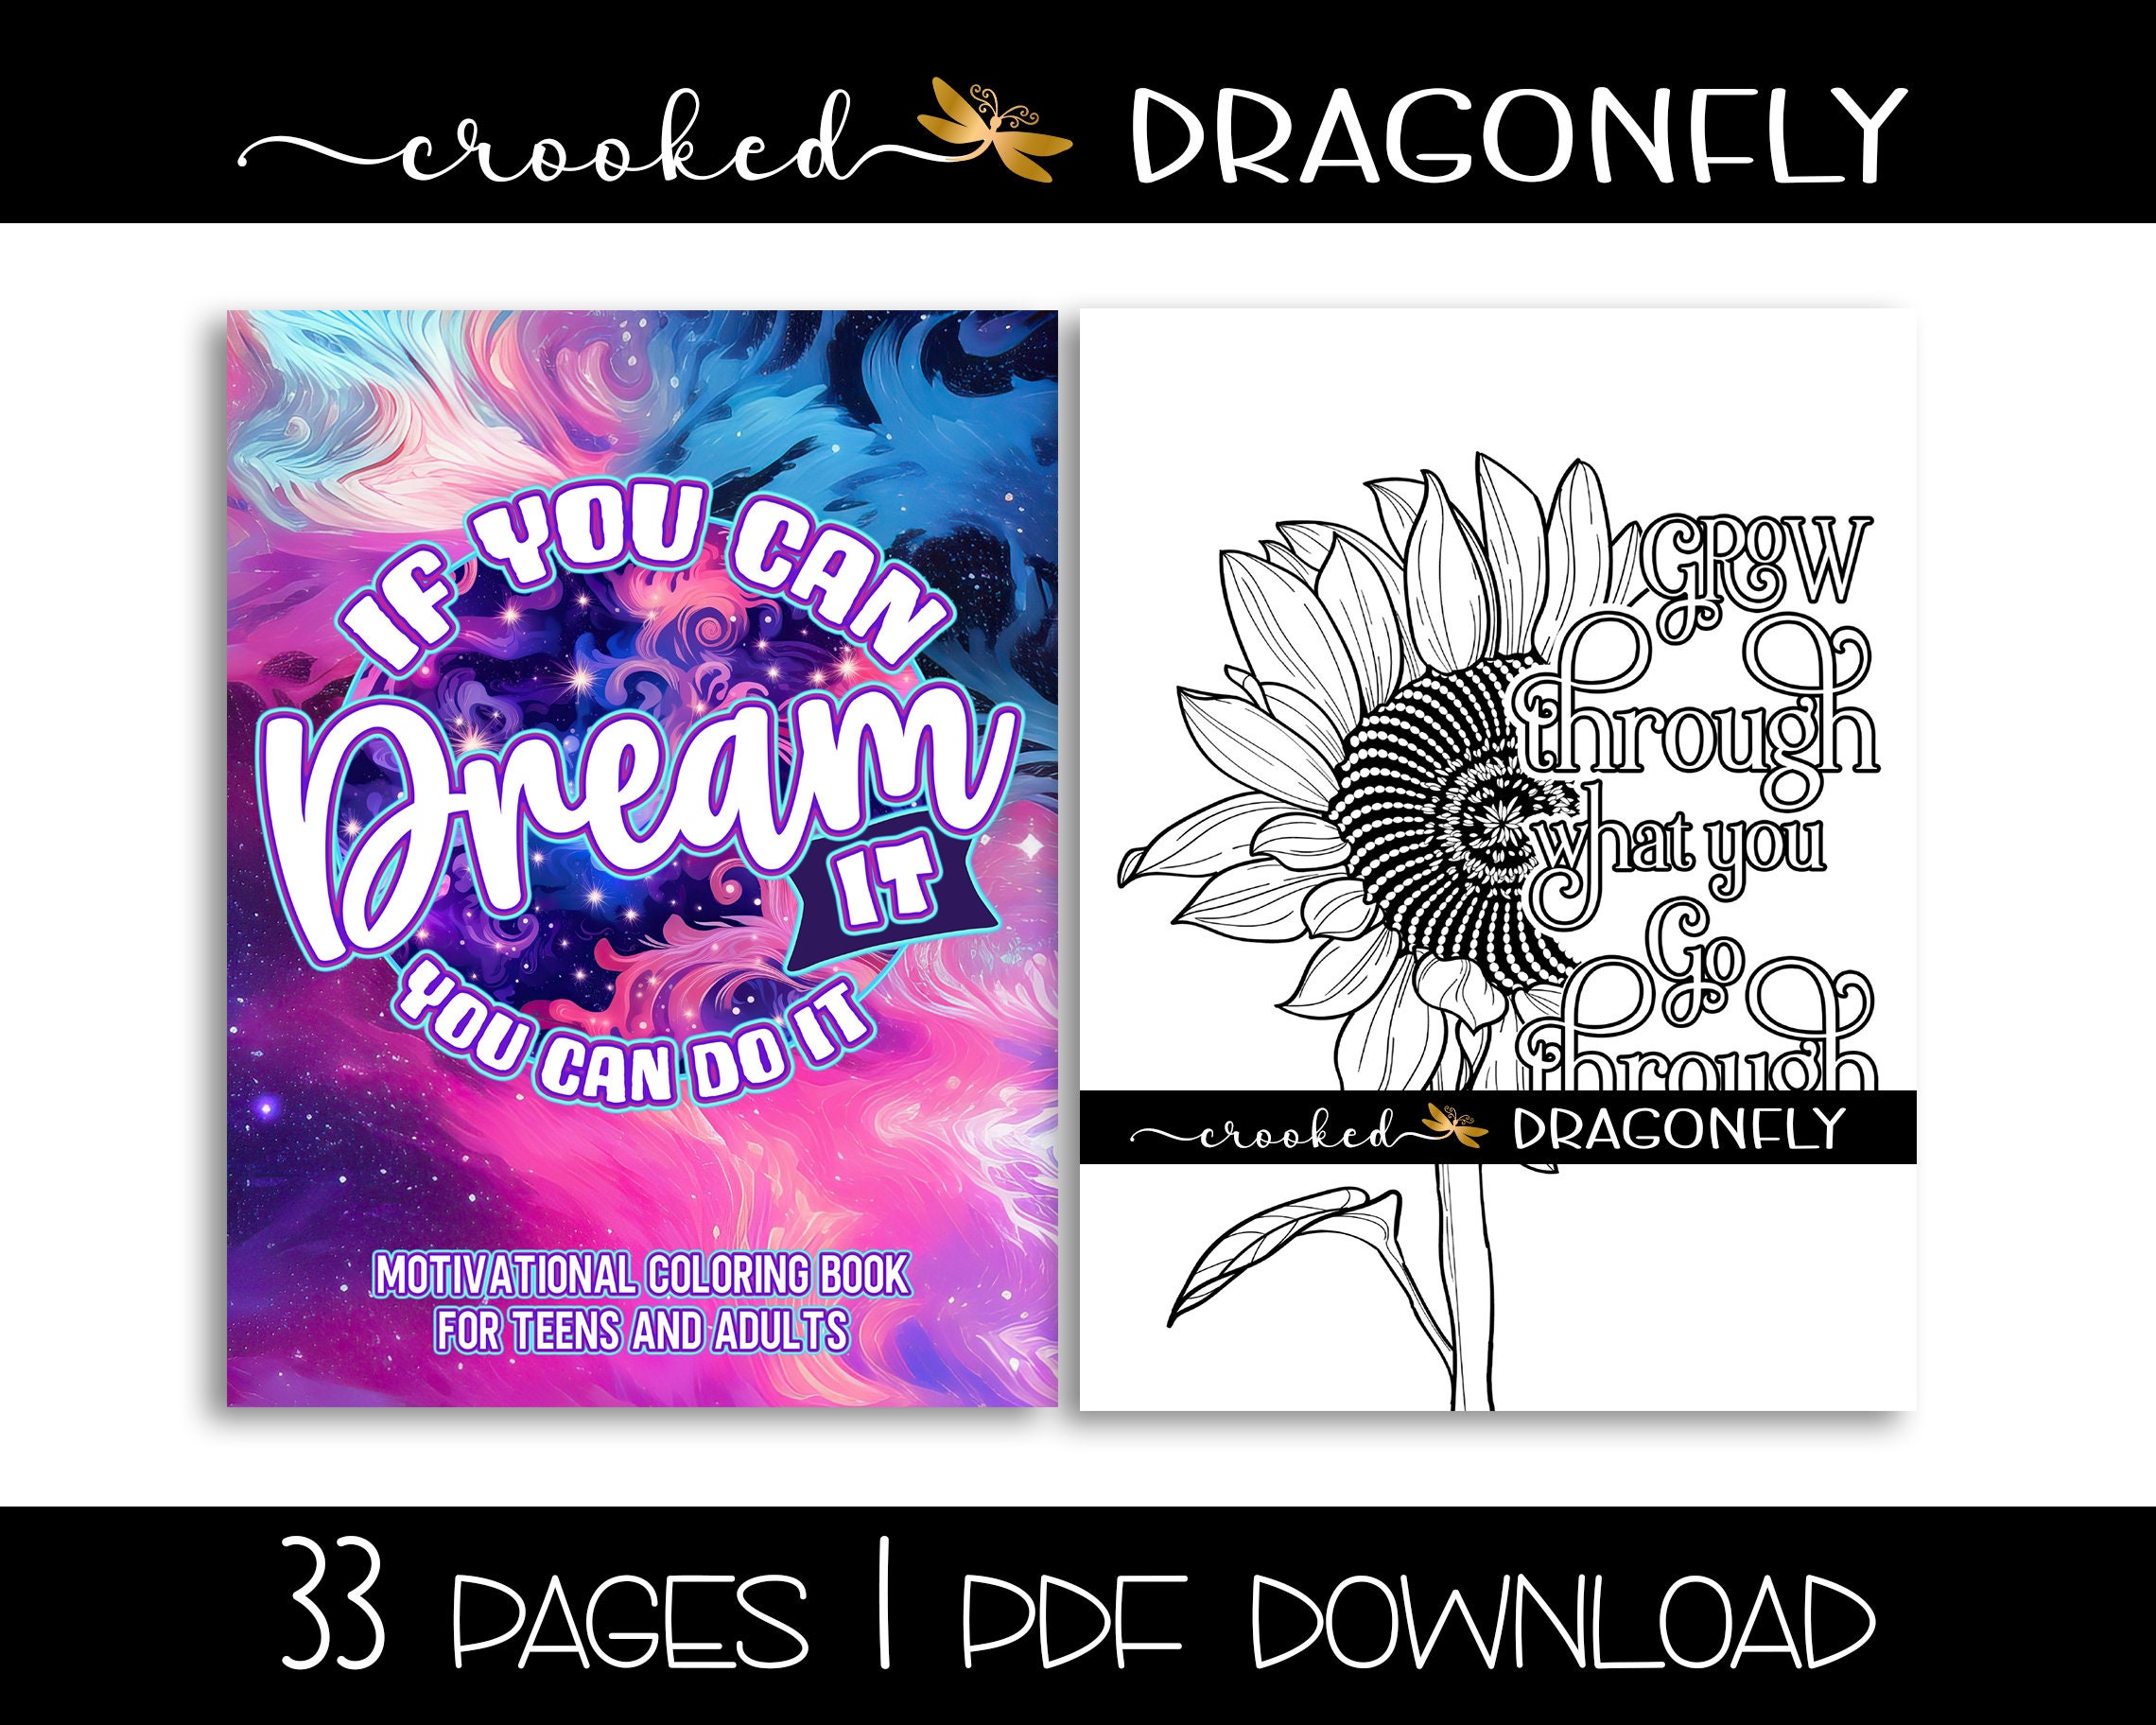 Personalized Young Teen Coloring Book With Affirmations A-Z